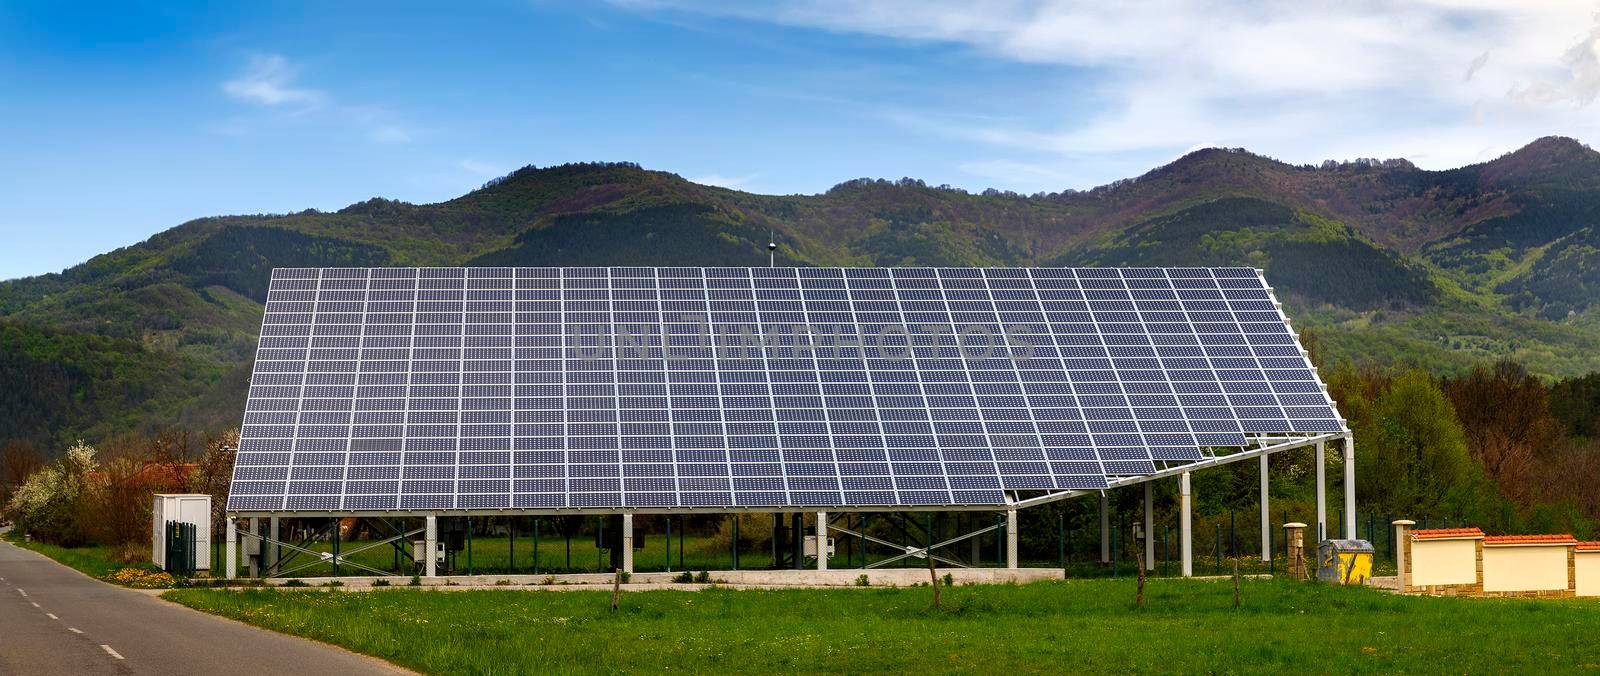 solar panels on the roof of a house. horizontal orientation, a mountain in the background by EdVal